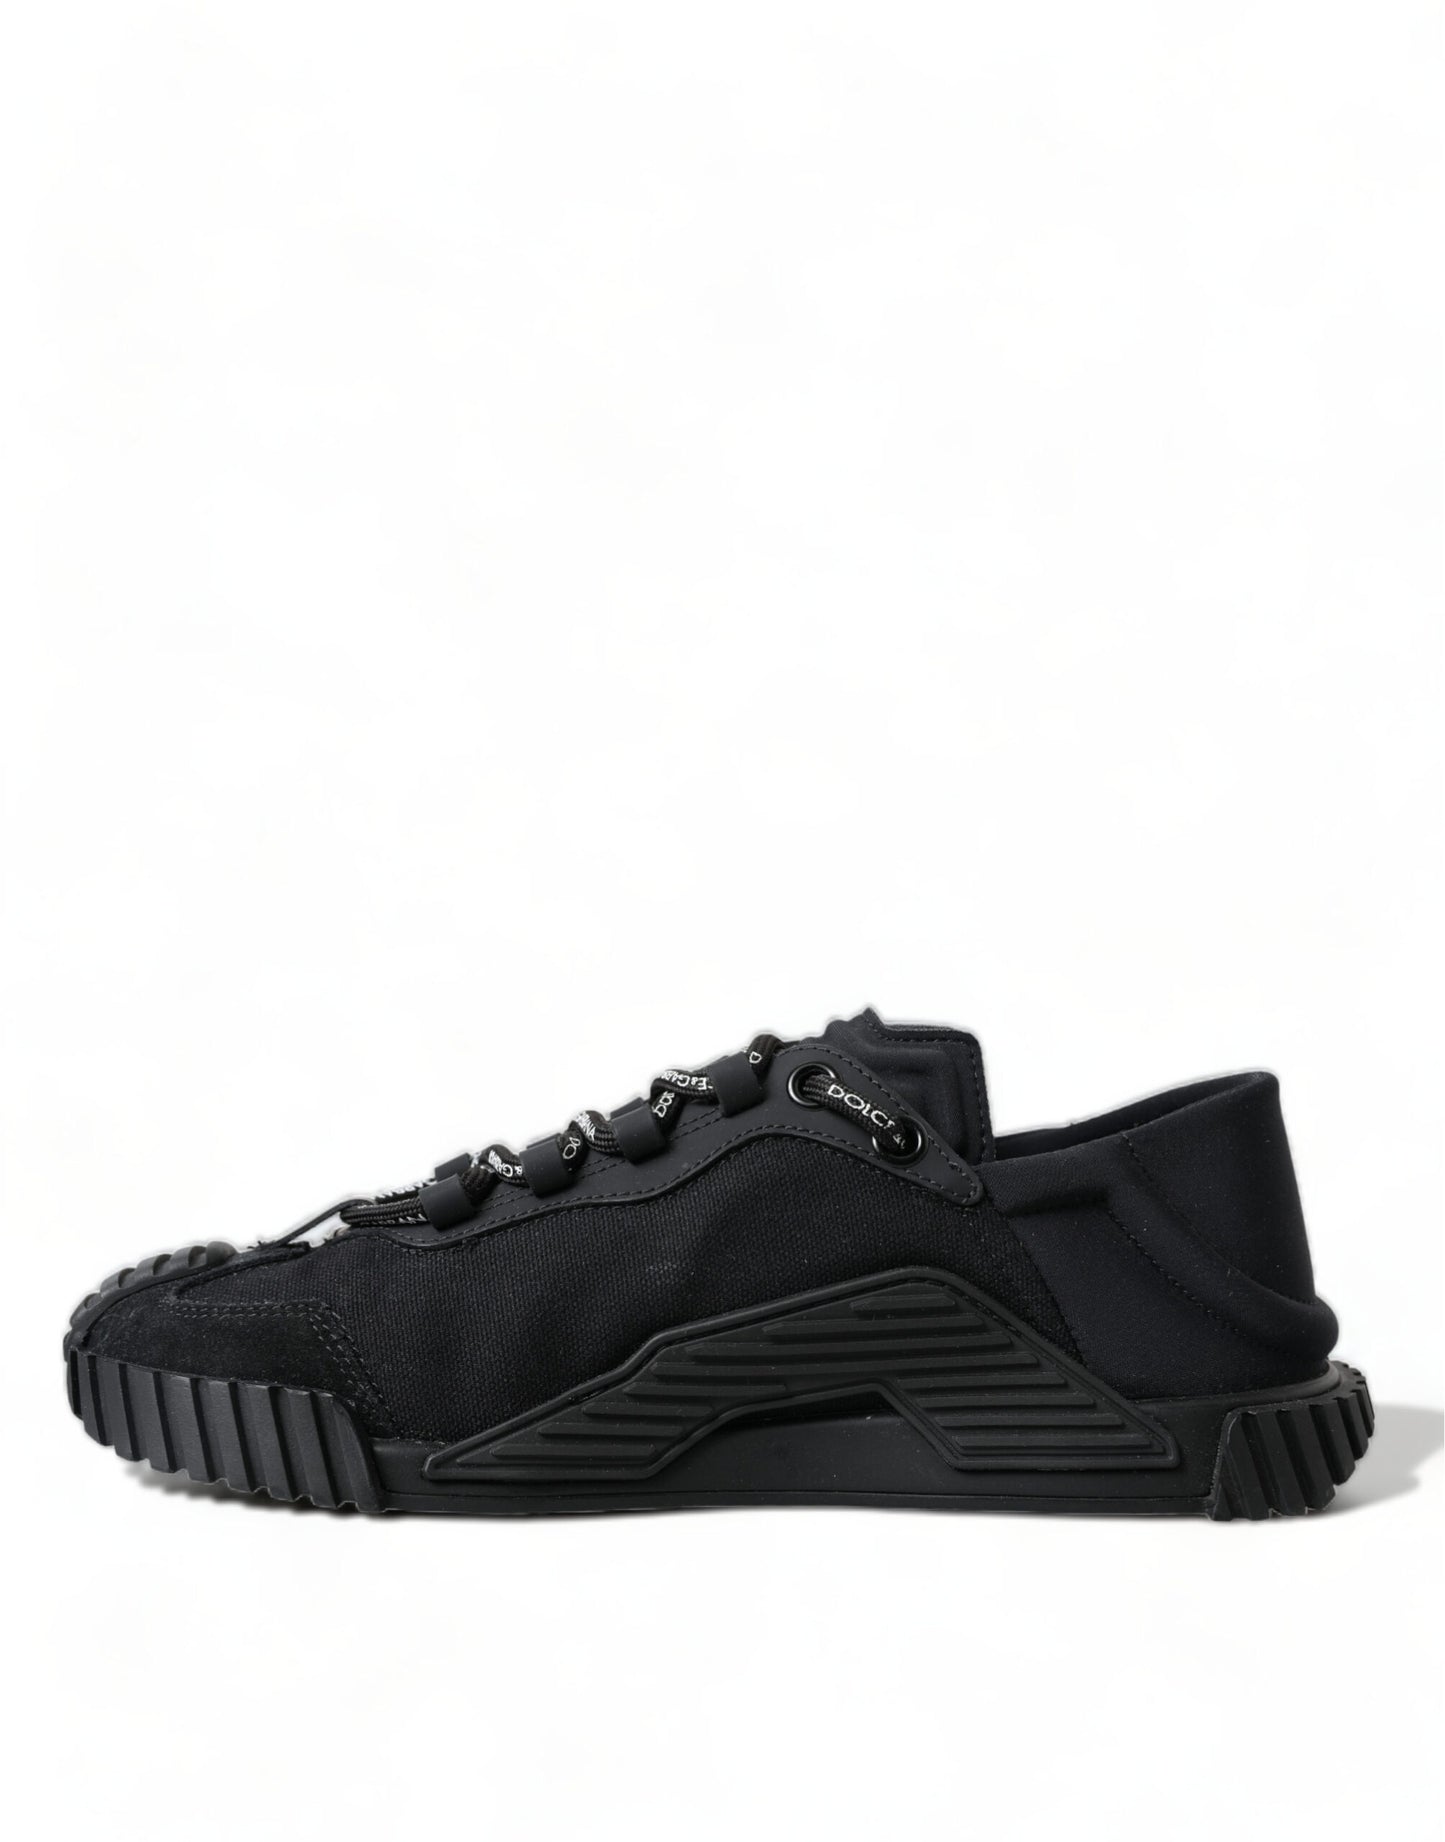 Dolce & Gabbana Elegant Black NS1 Lace-Up Sneakers